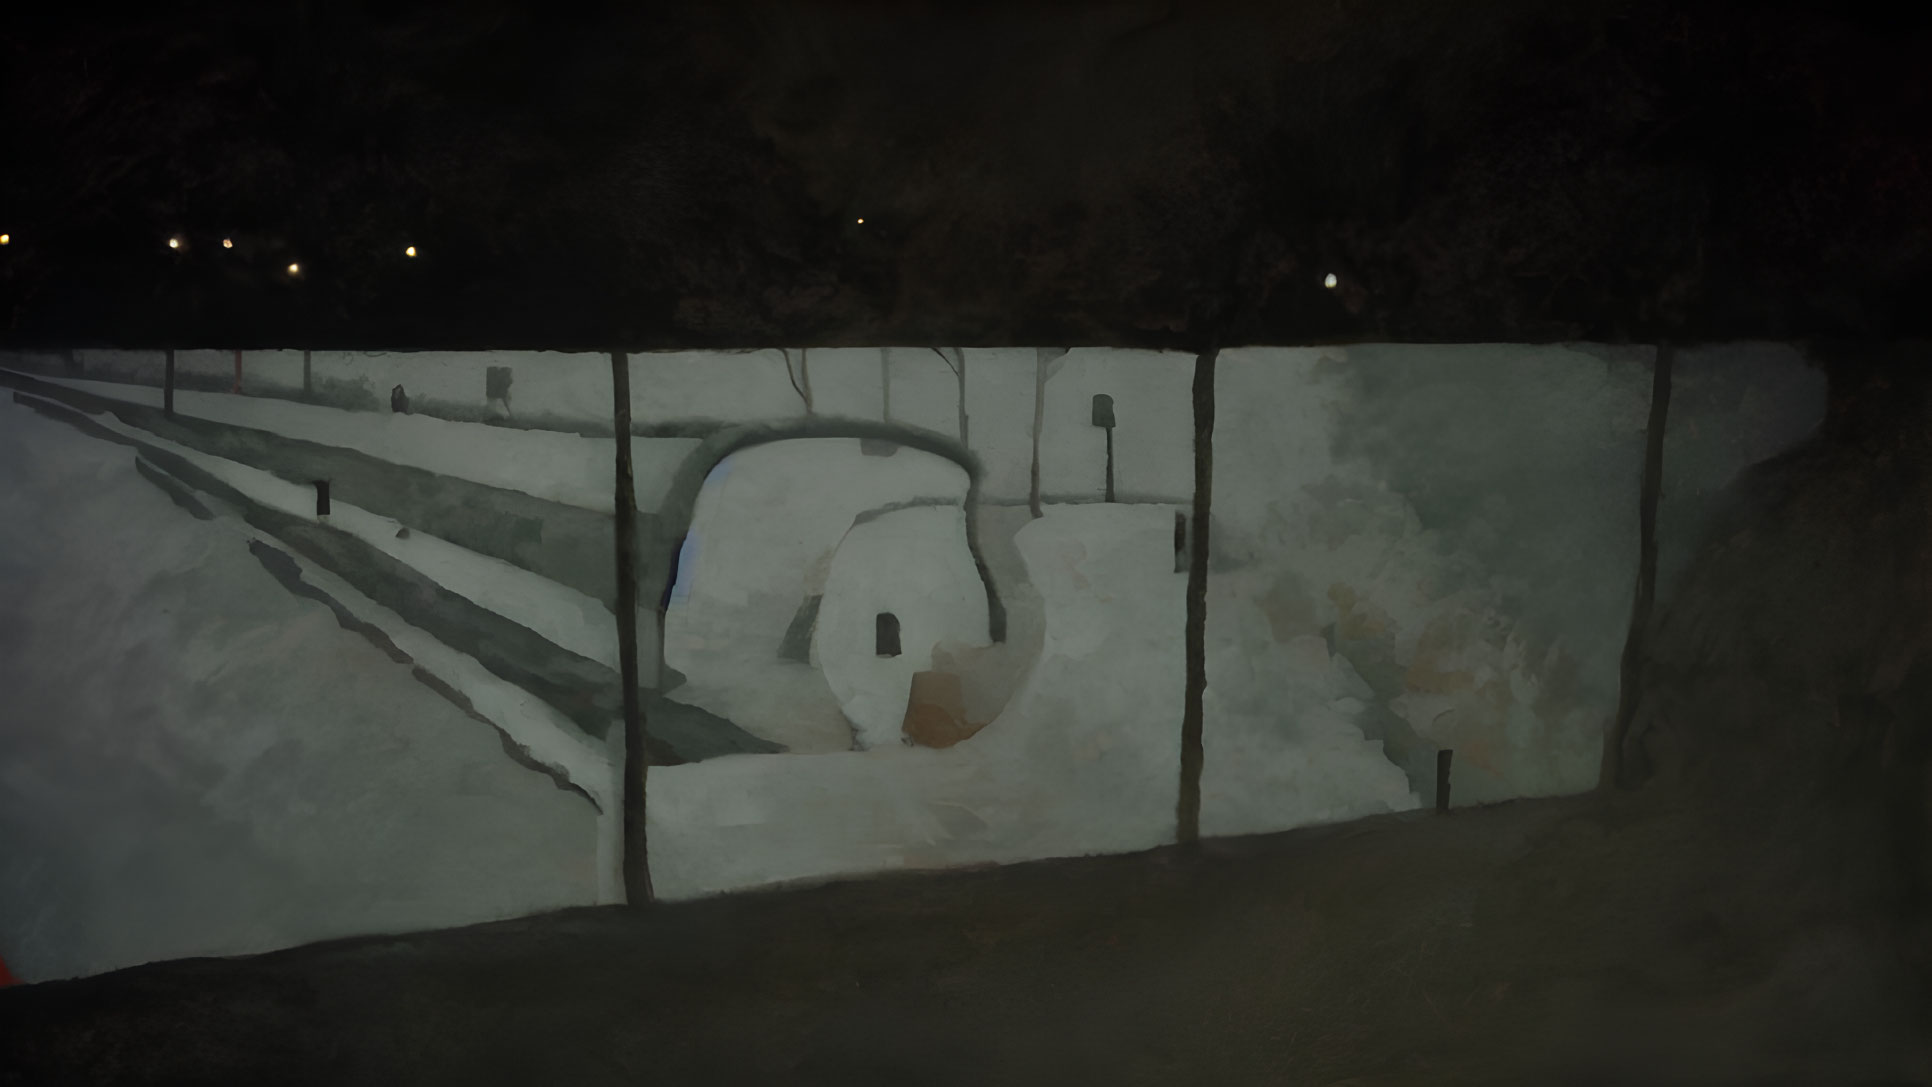 Mural of Snail in Night Scene with Soft Shadows